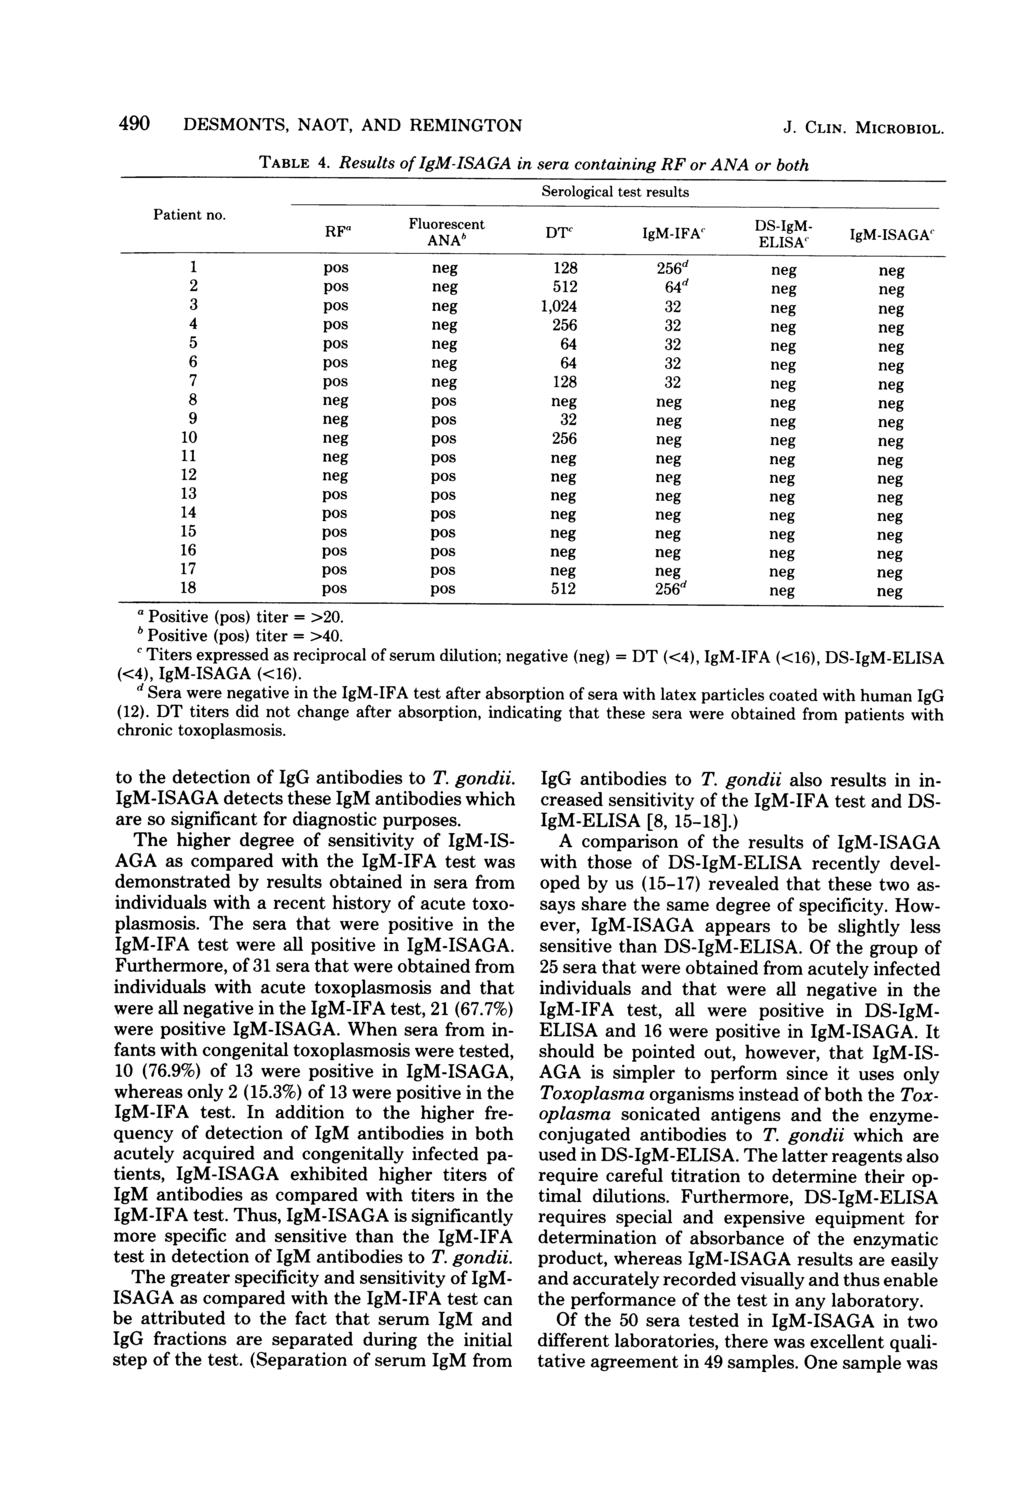 490 DESMONTS, NAOT, AND REMINGTON TABLE 4. Results of IgM-ISAGA in sera containing RF or ANA or both Serological test results J. CLIN. MICROBIOL. Patient no.